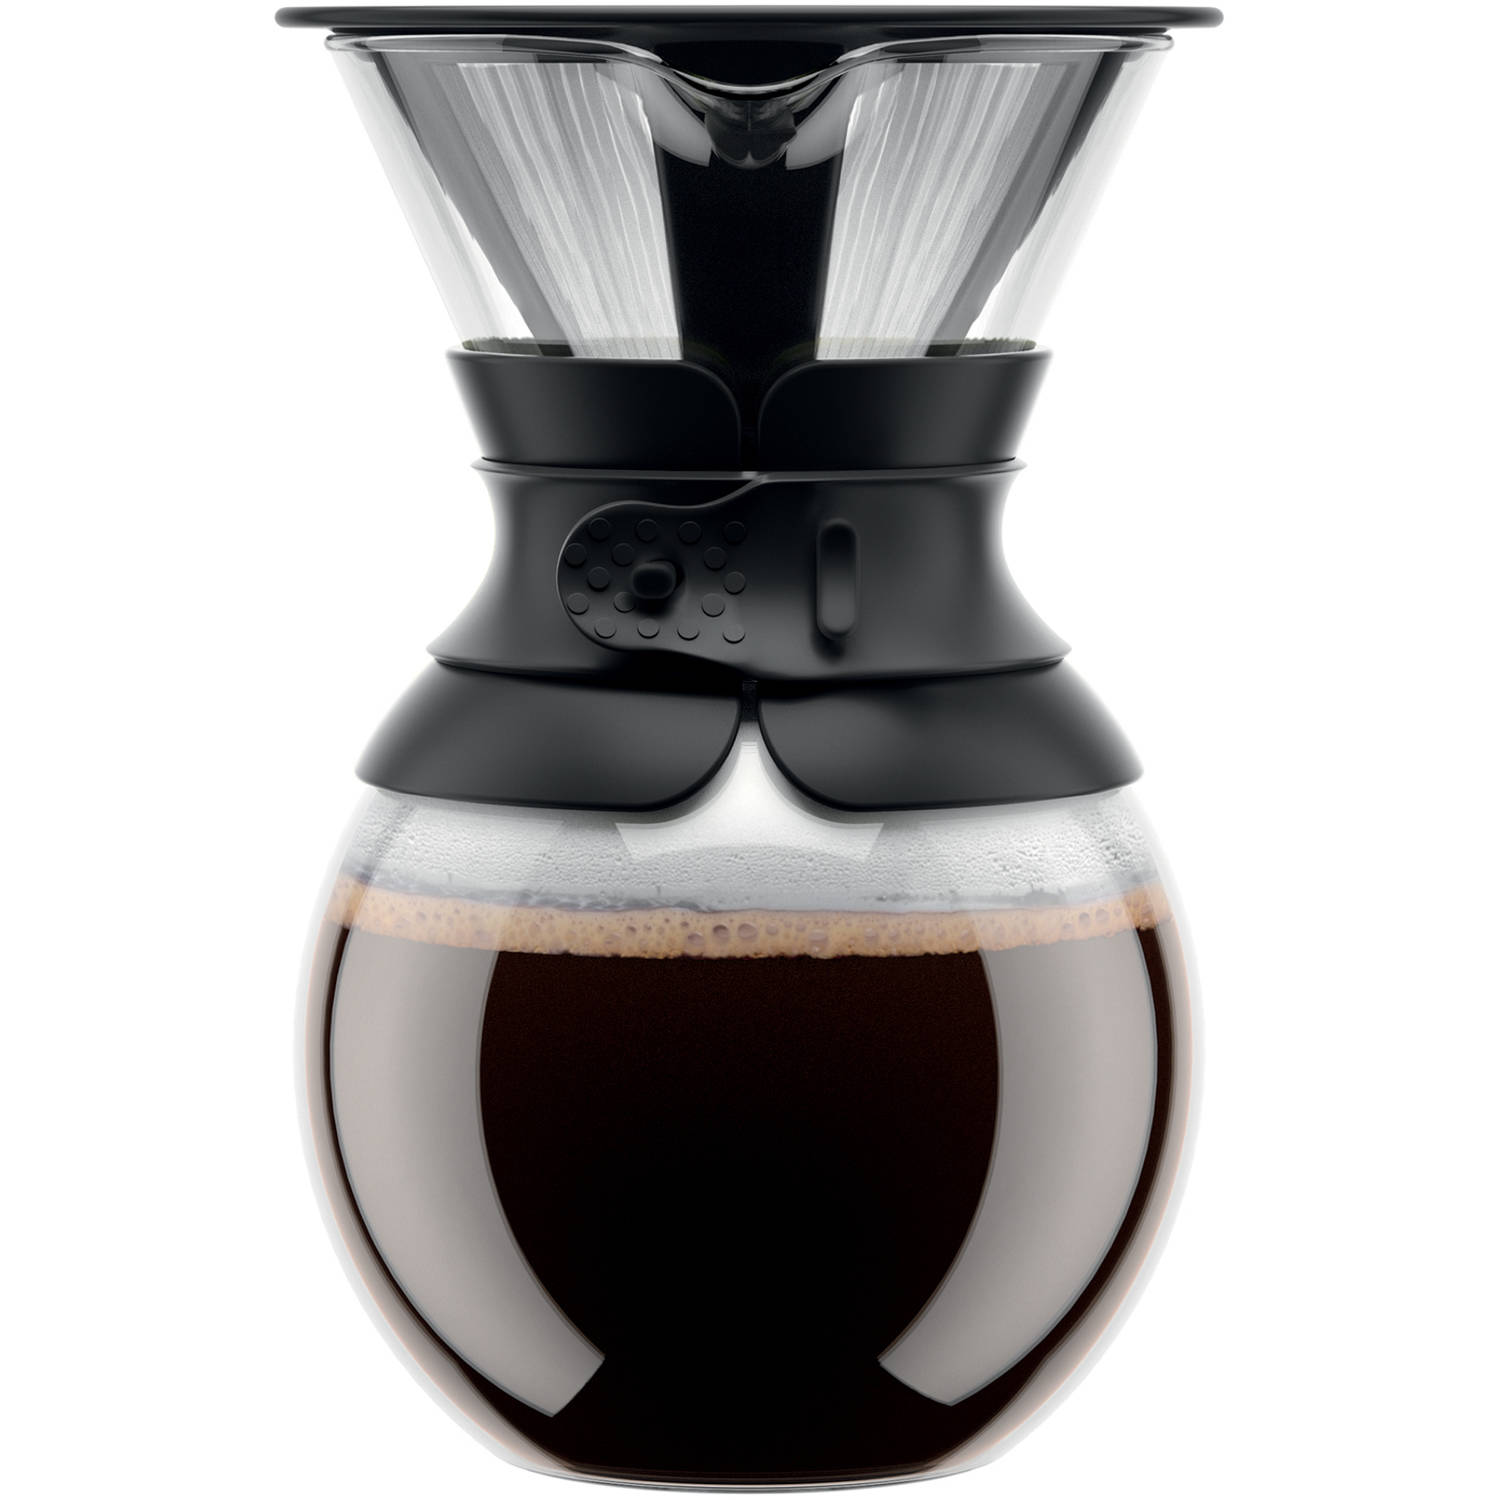 BODUM Pour-Over Coffee Dripper with Reusable Stainless Steel Filter, 34 Ounce, Black - image 1 of 6